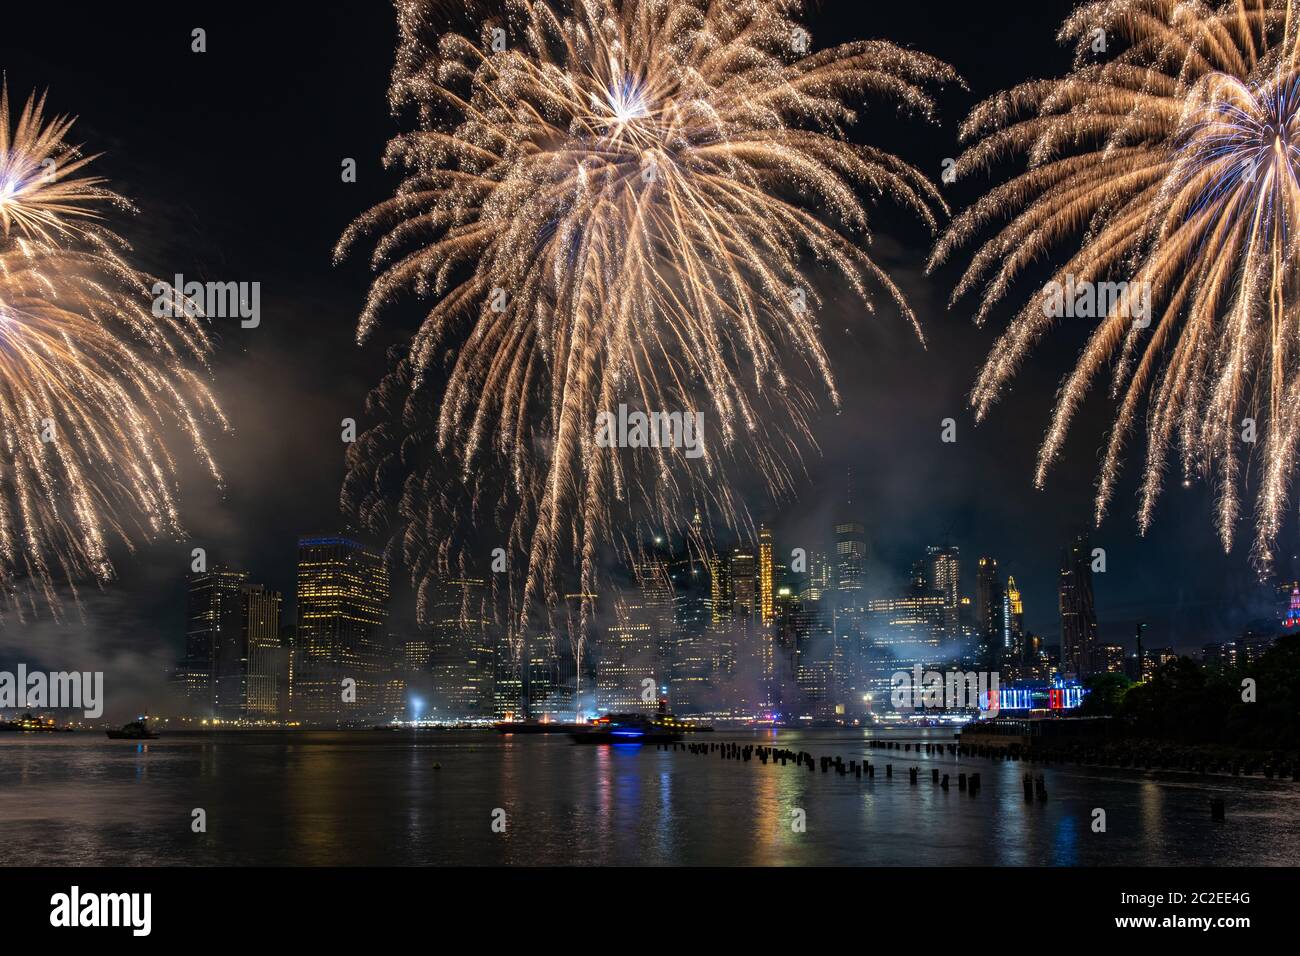 Macy's 4th of July Independence Day Fireworks show on east river with Lower Manhattan Skyline Stock Photo